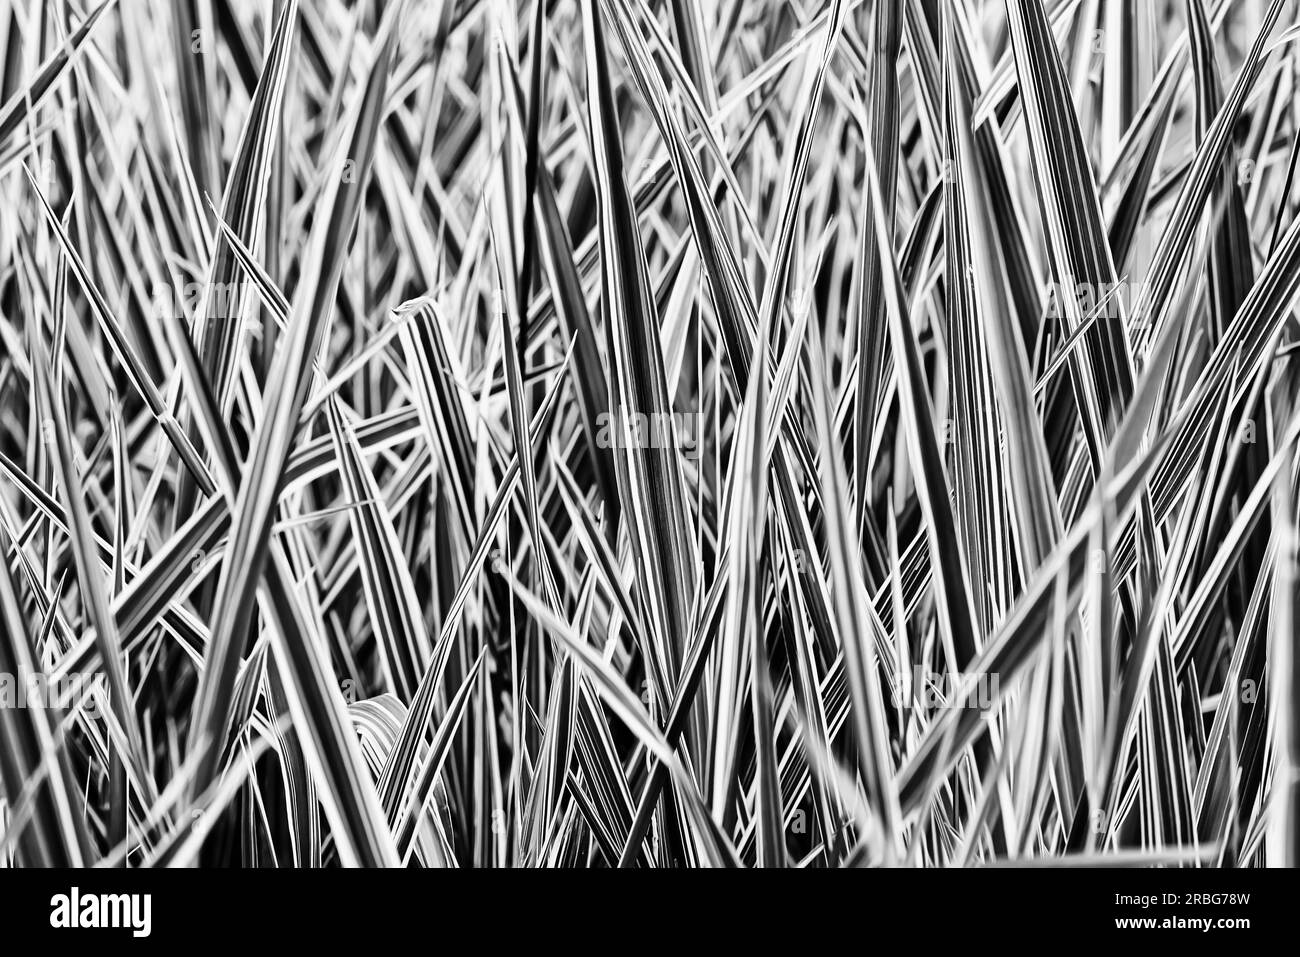 Black and white picture of green and white Phalaris arundinacea leaves, also known as reed canary grass and gardener's garters, growing in a park at Stock Photo